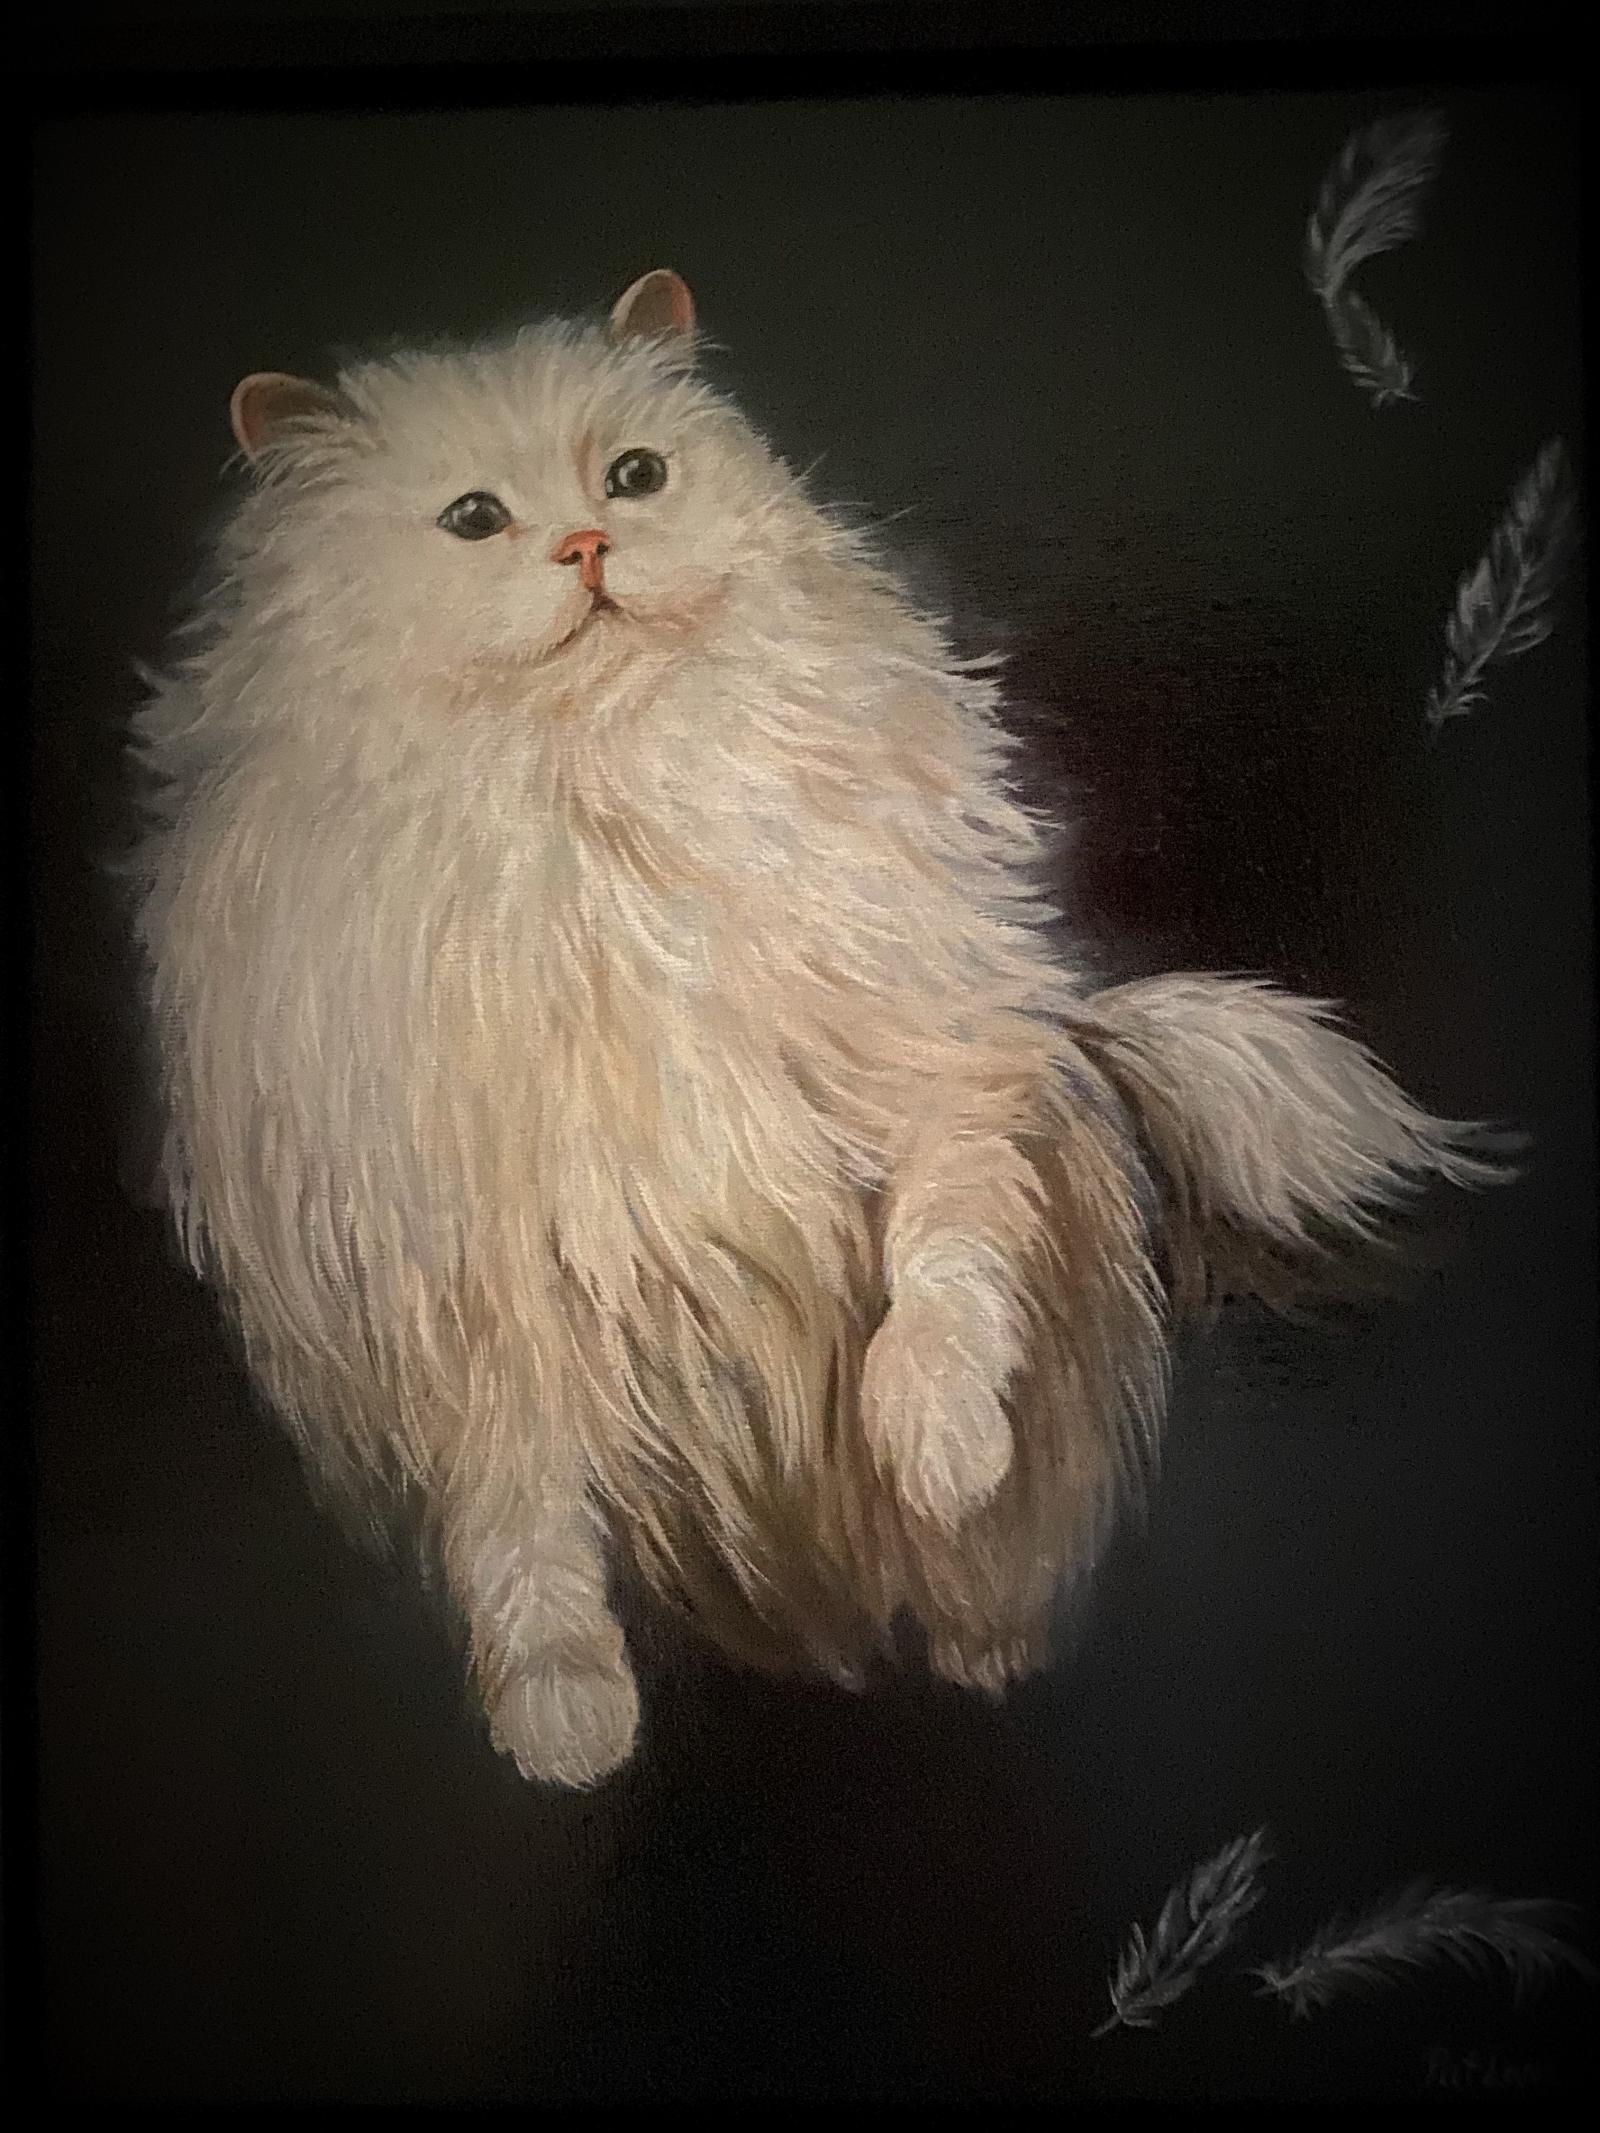 Oil painting of a white cat trying to catch falling feathers